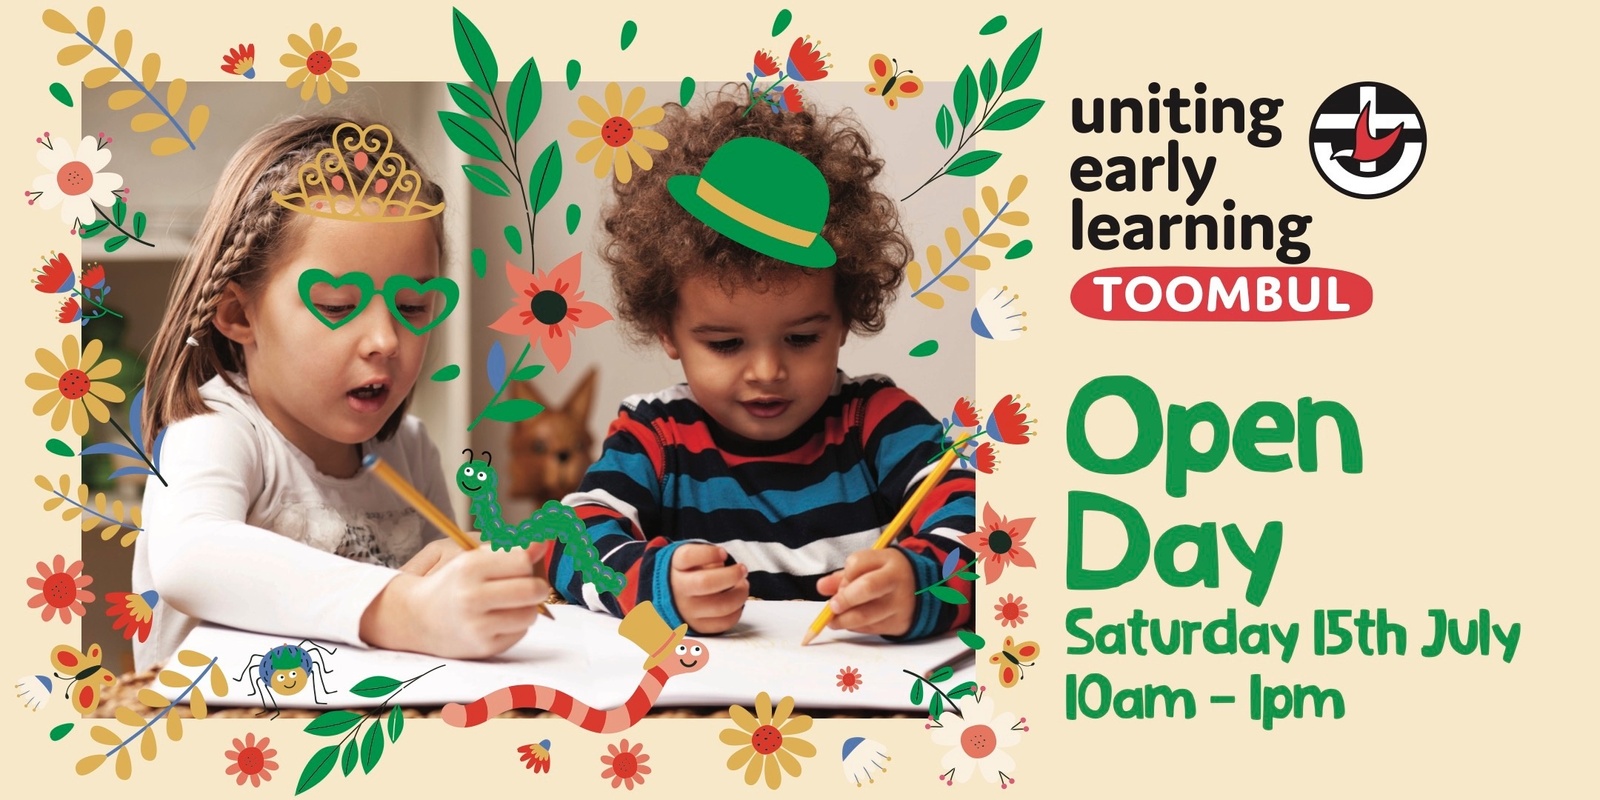 Banner image for Open Day Uniting Early Learning Toombul